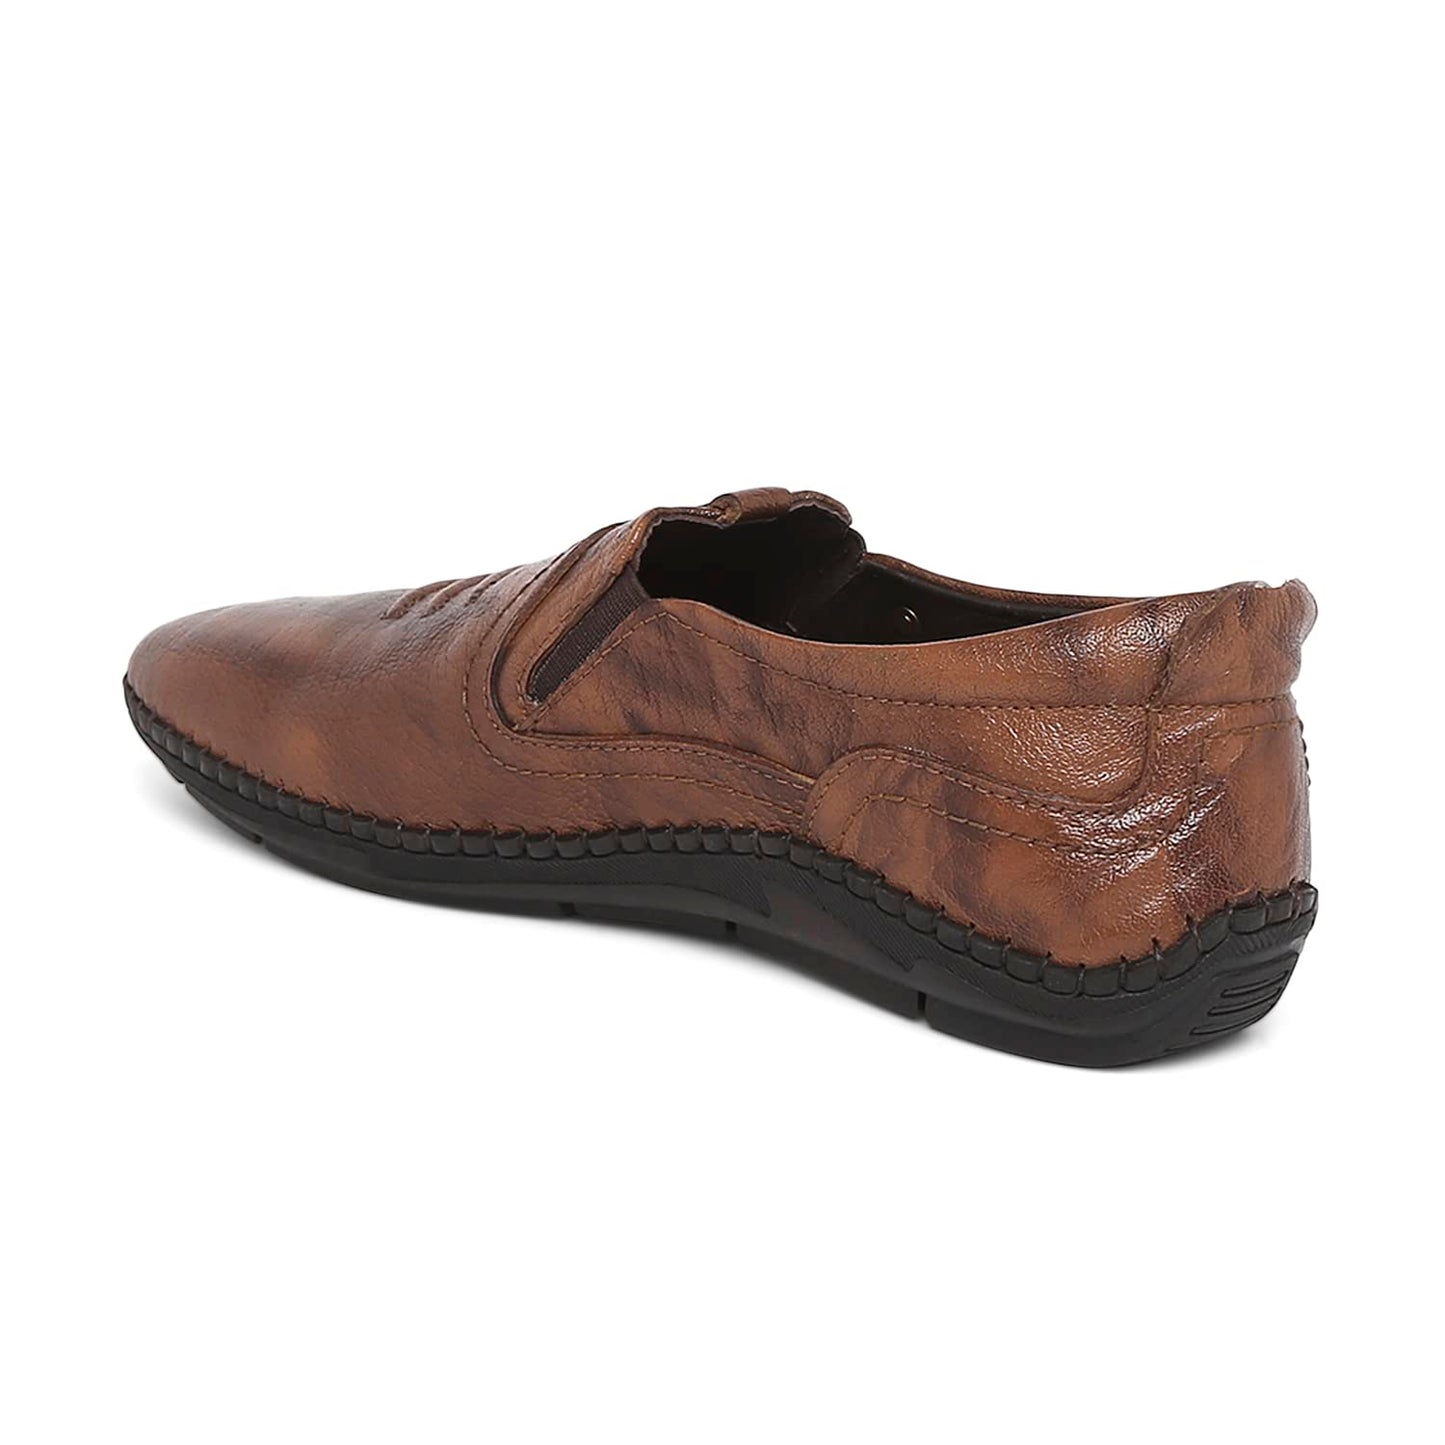 Buckaroo: Andy Fine Mild Natural Leather Tan Casual Shoes for Mens 